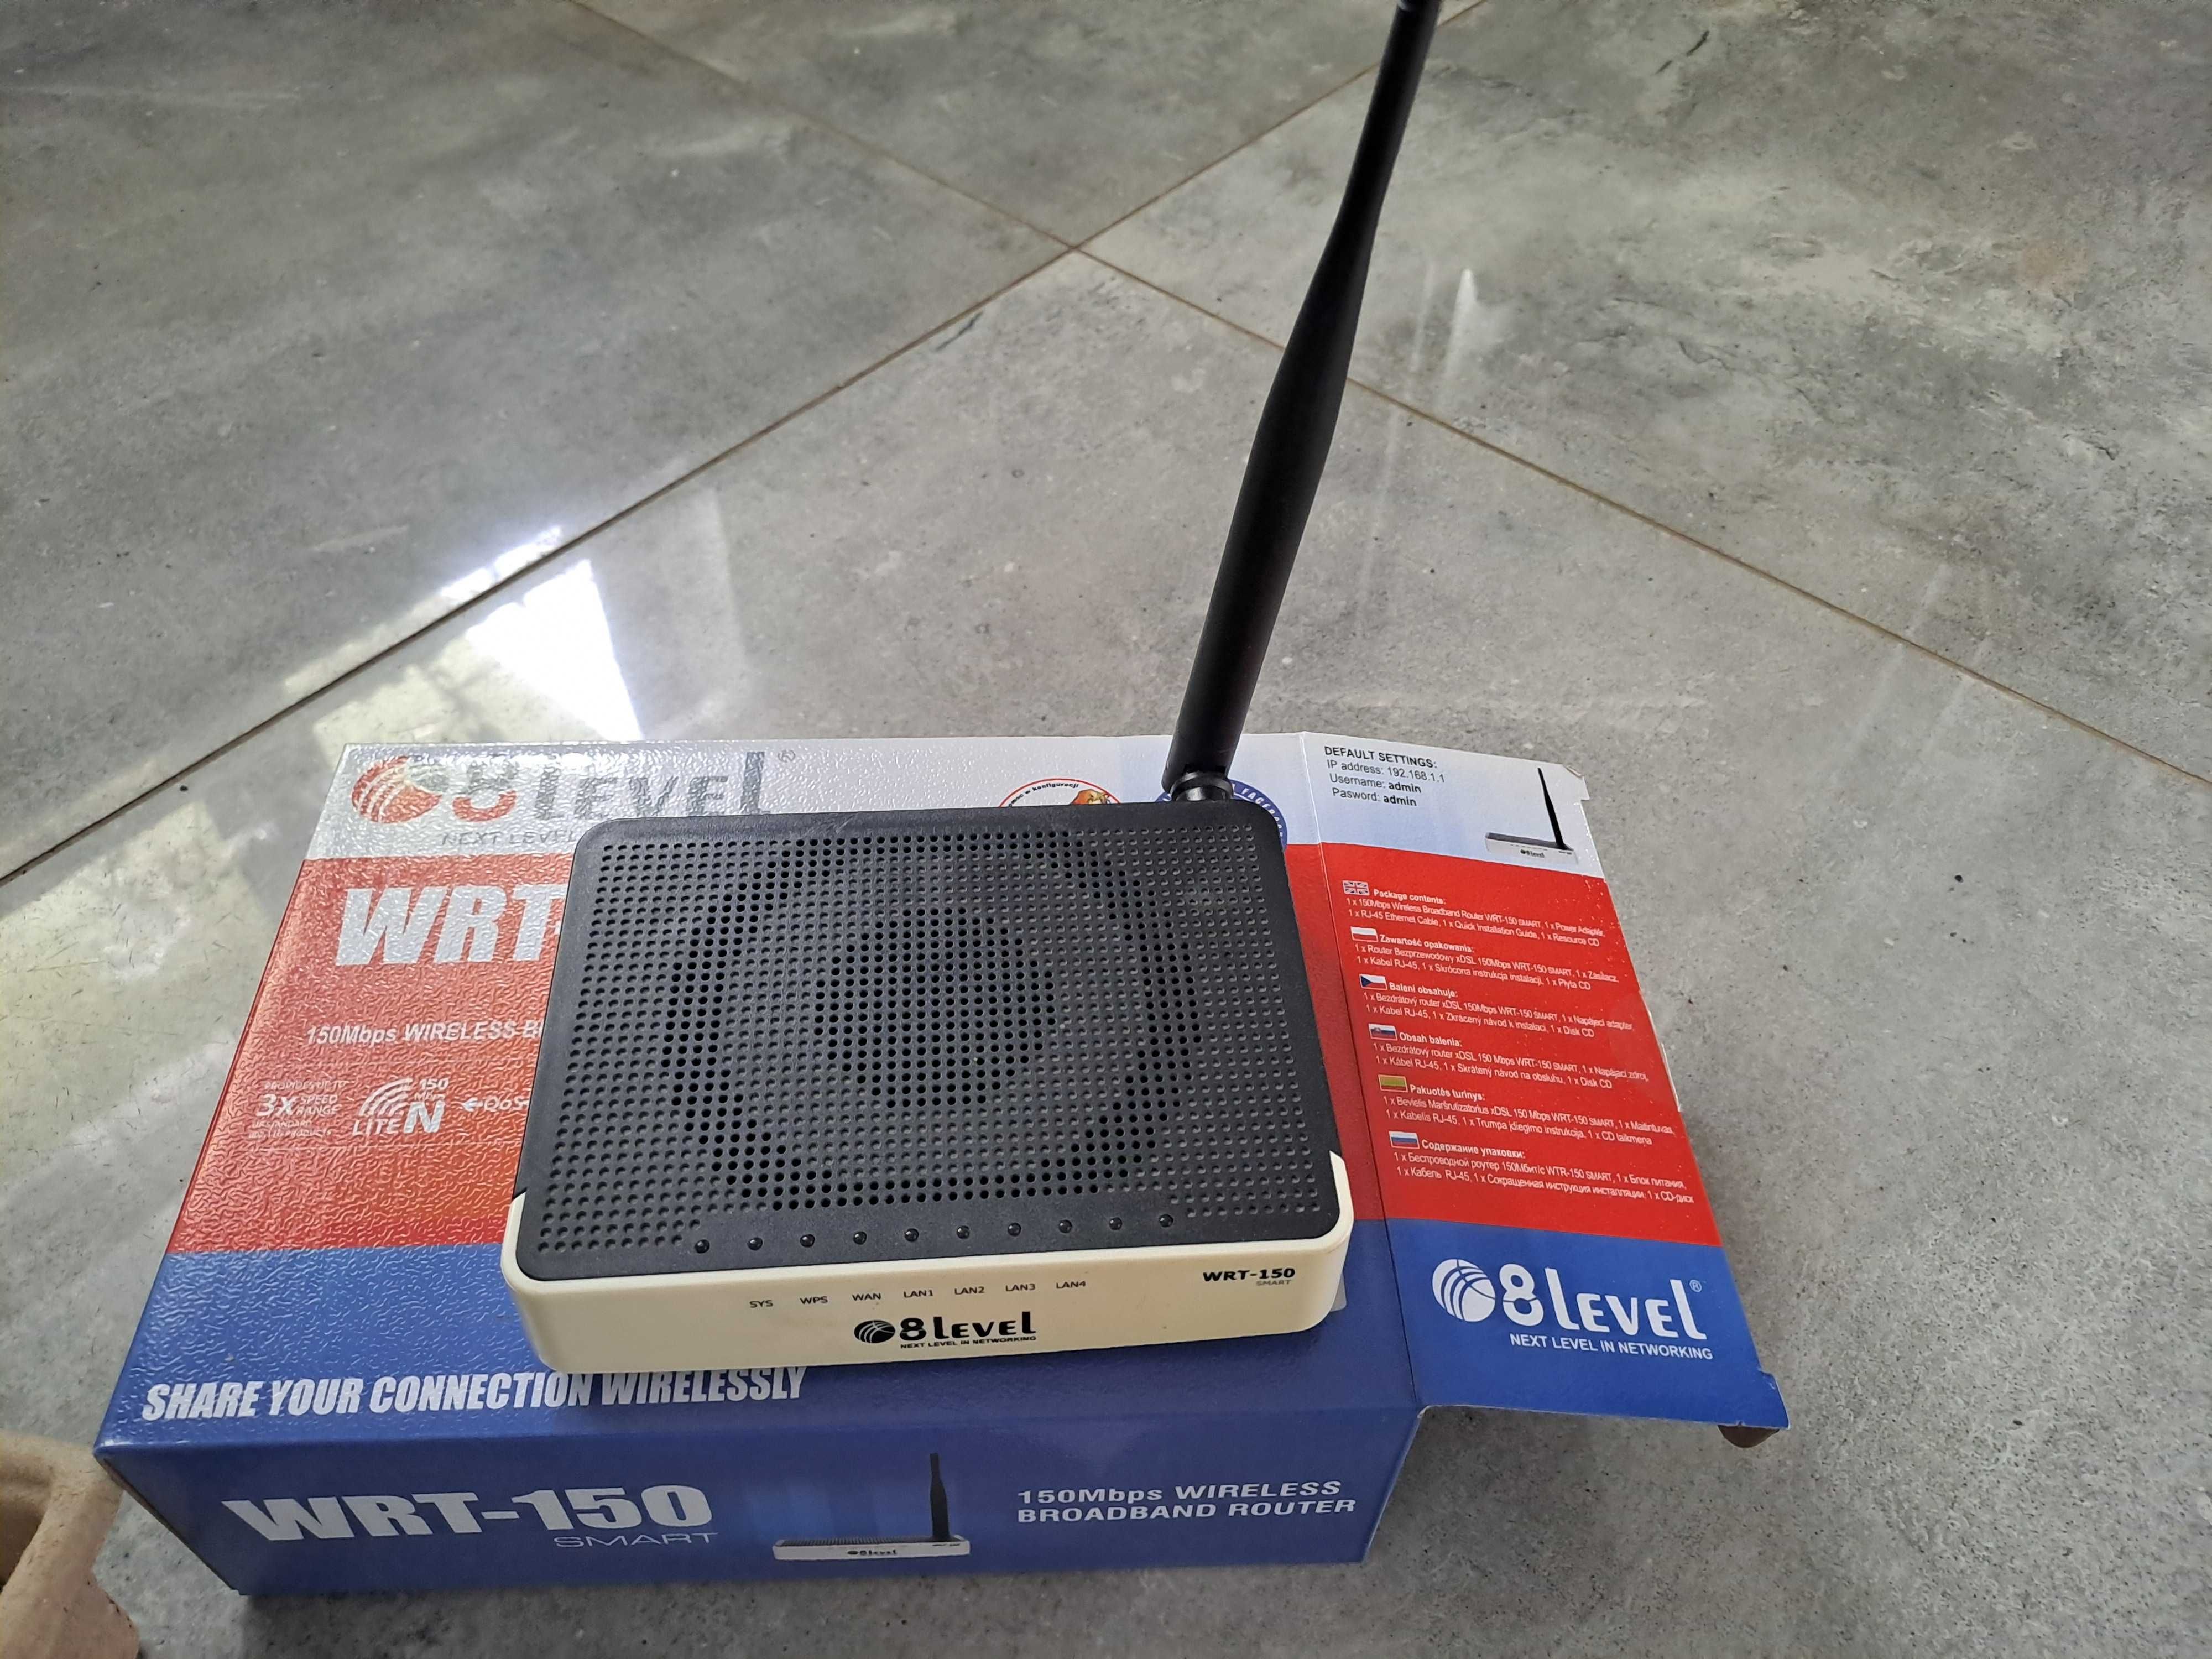 Router wi- fi 8level WRT-150